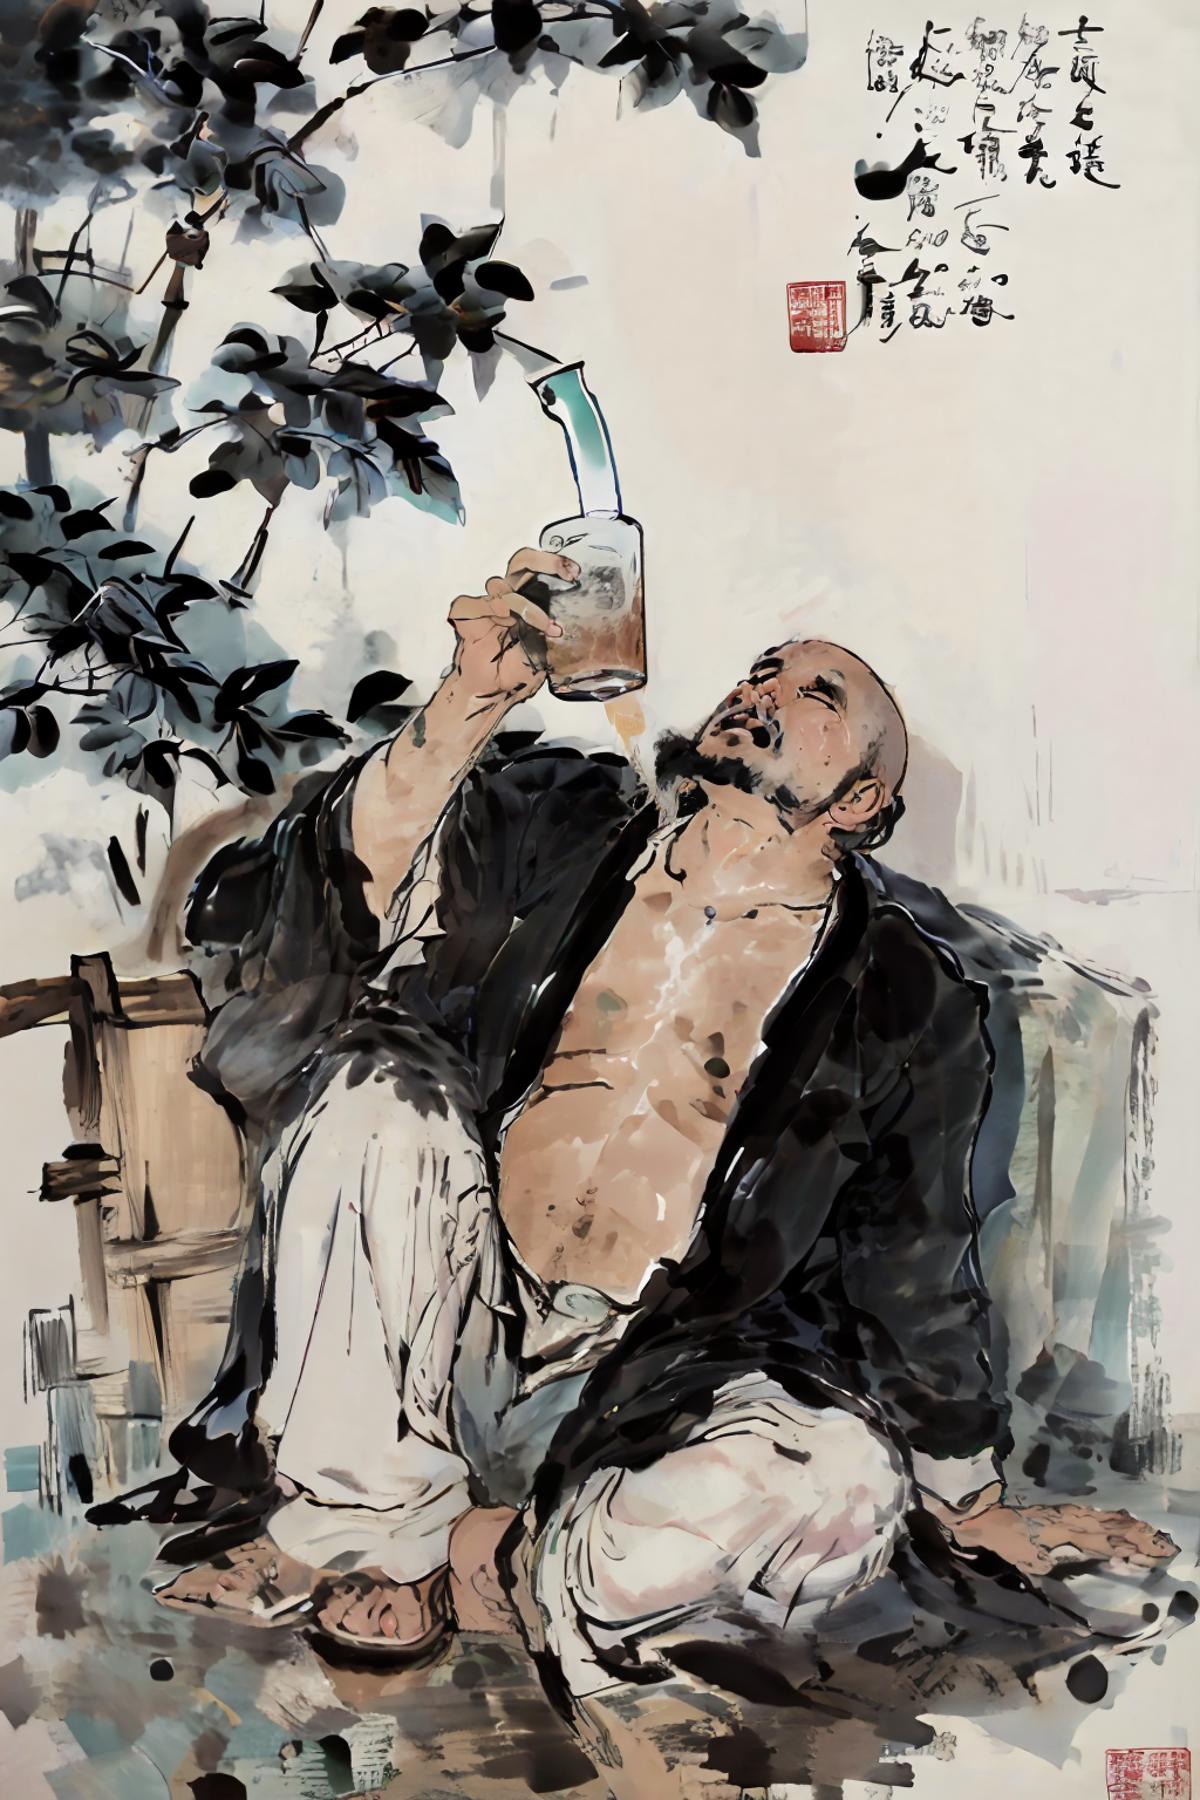 A man in a robe drinking from a glass in front of a tree.